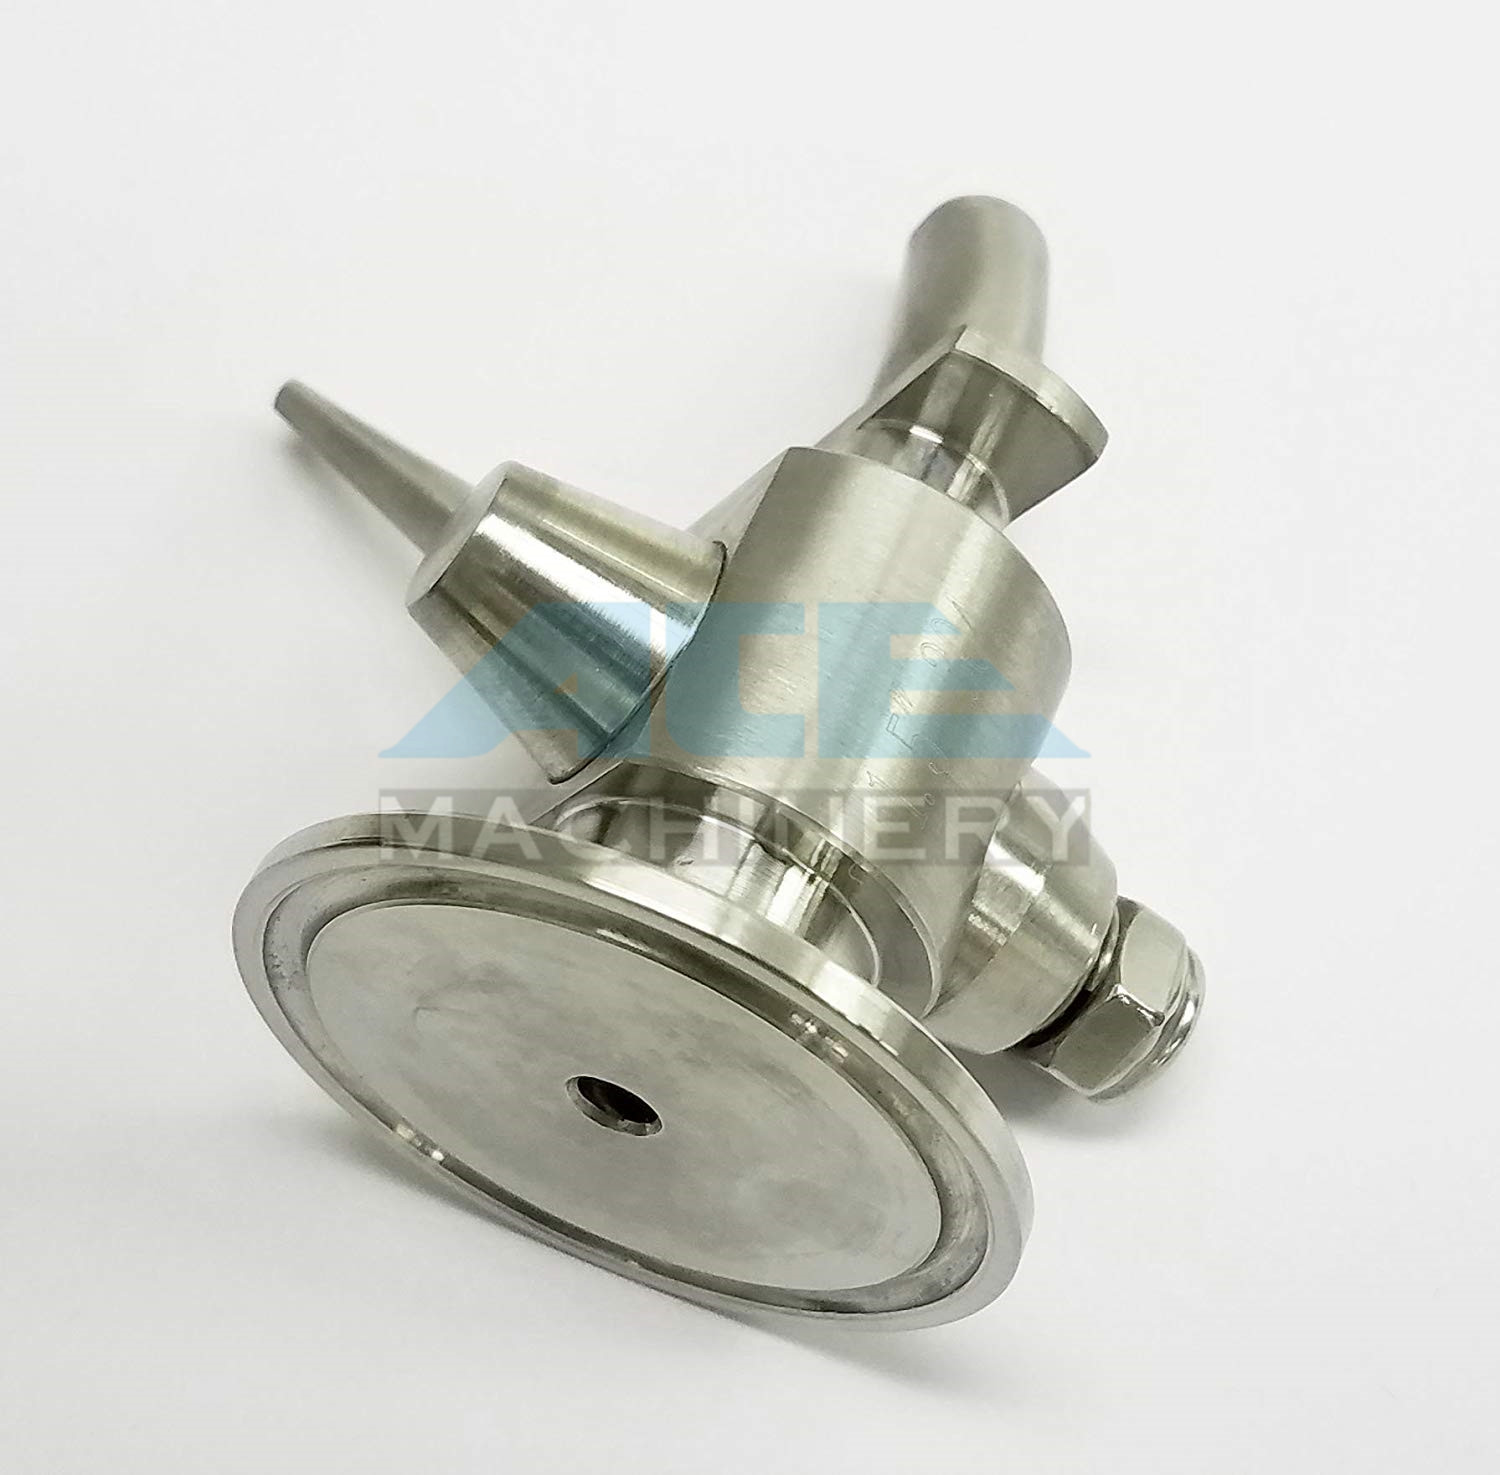  Sanitary Stainless Steel Sample Valve Tri Clamp Style Saniatry Pipe Fitting Sample Valve Manufactures